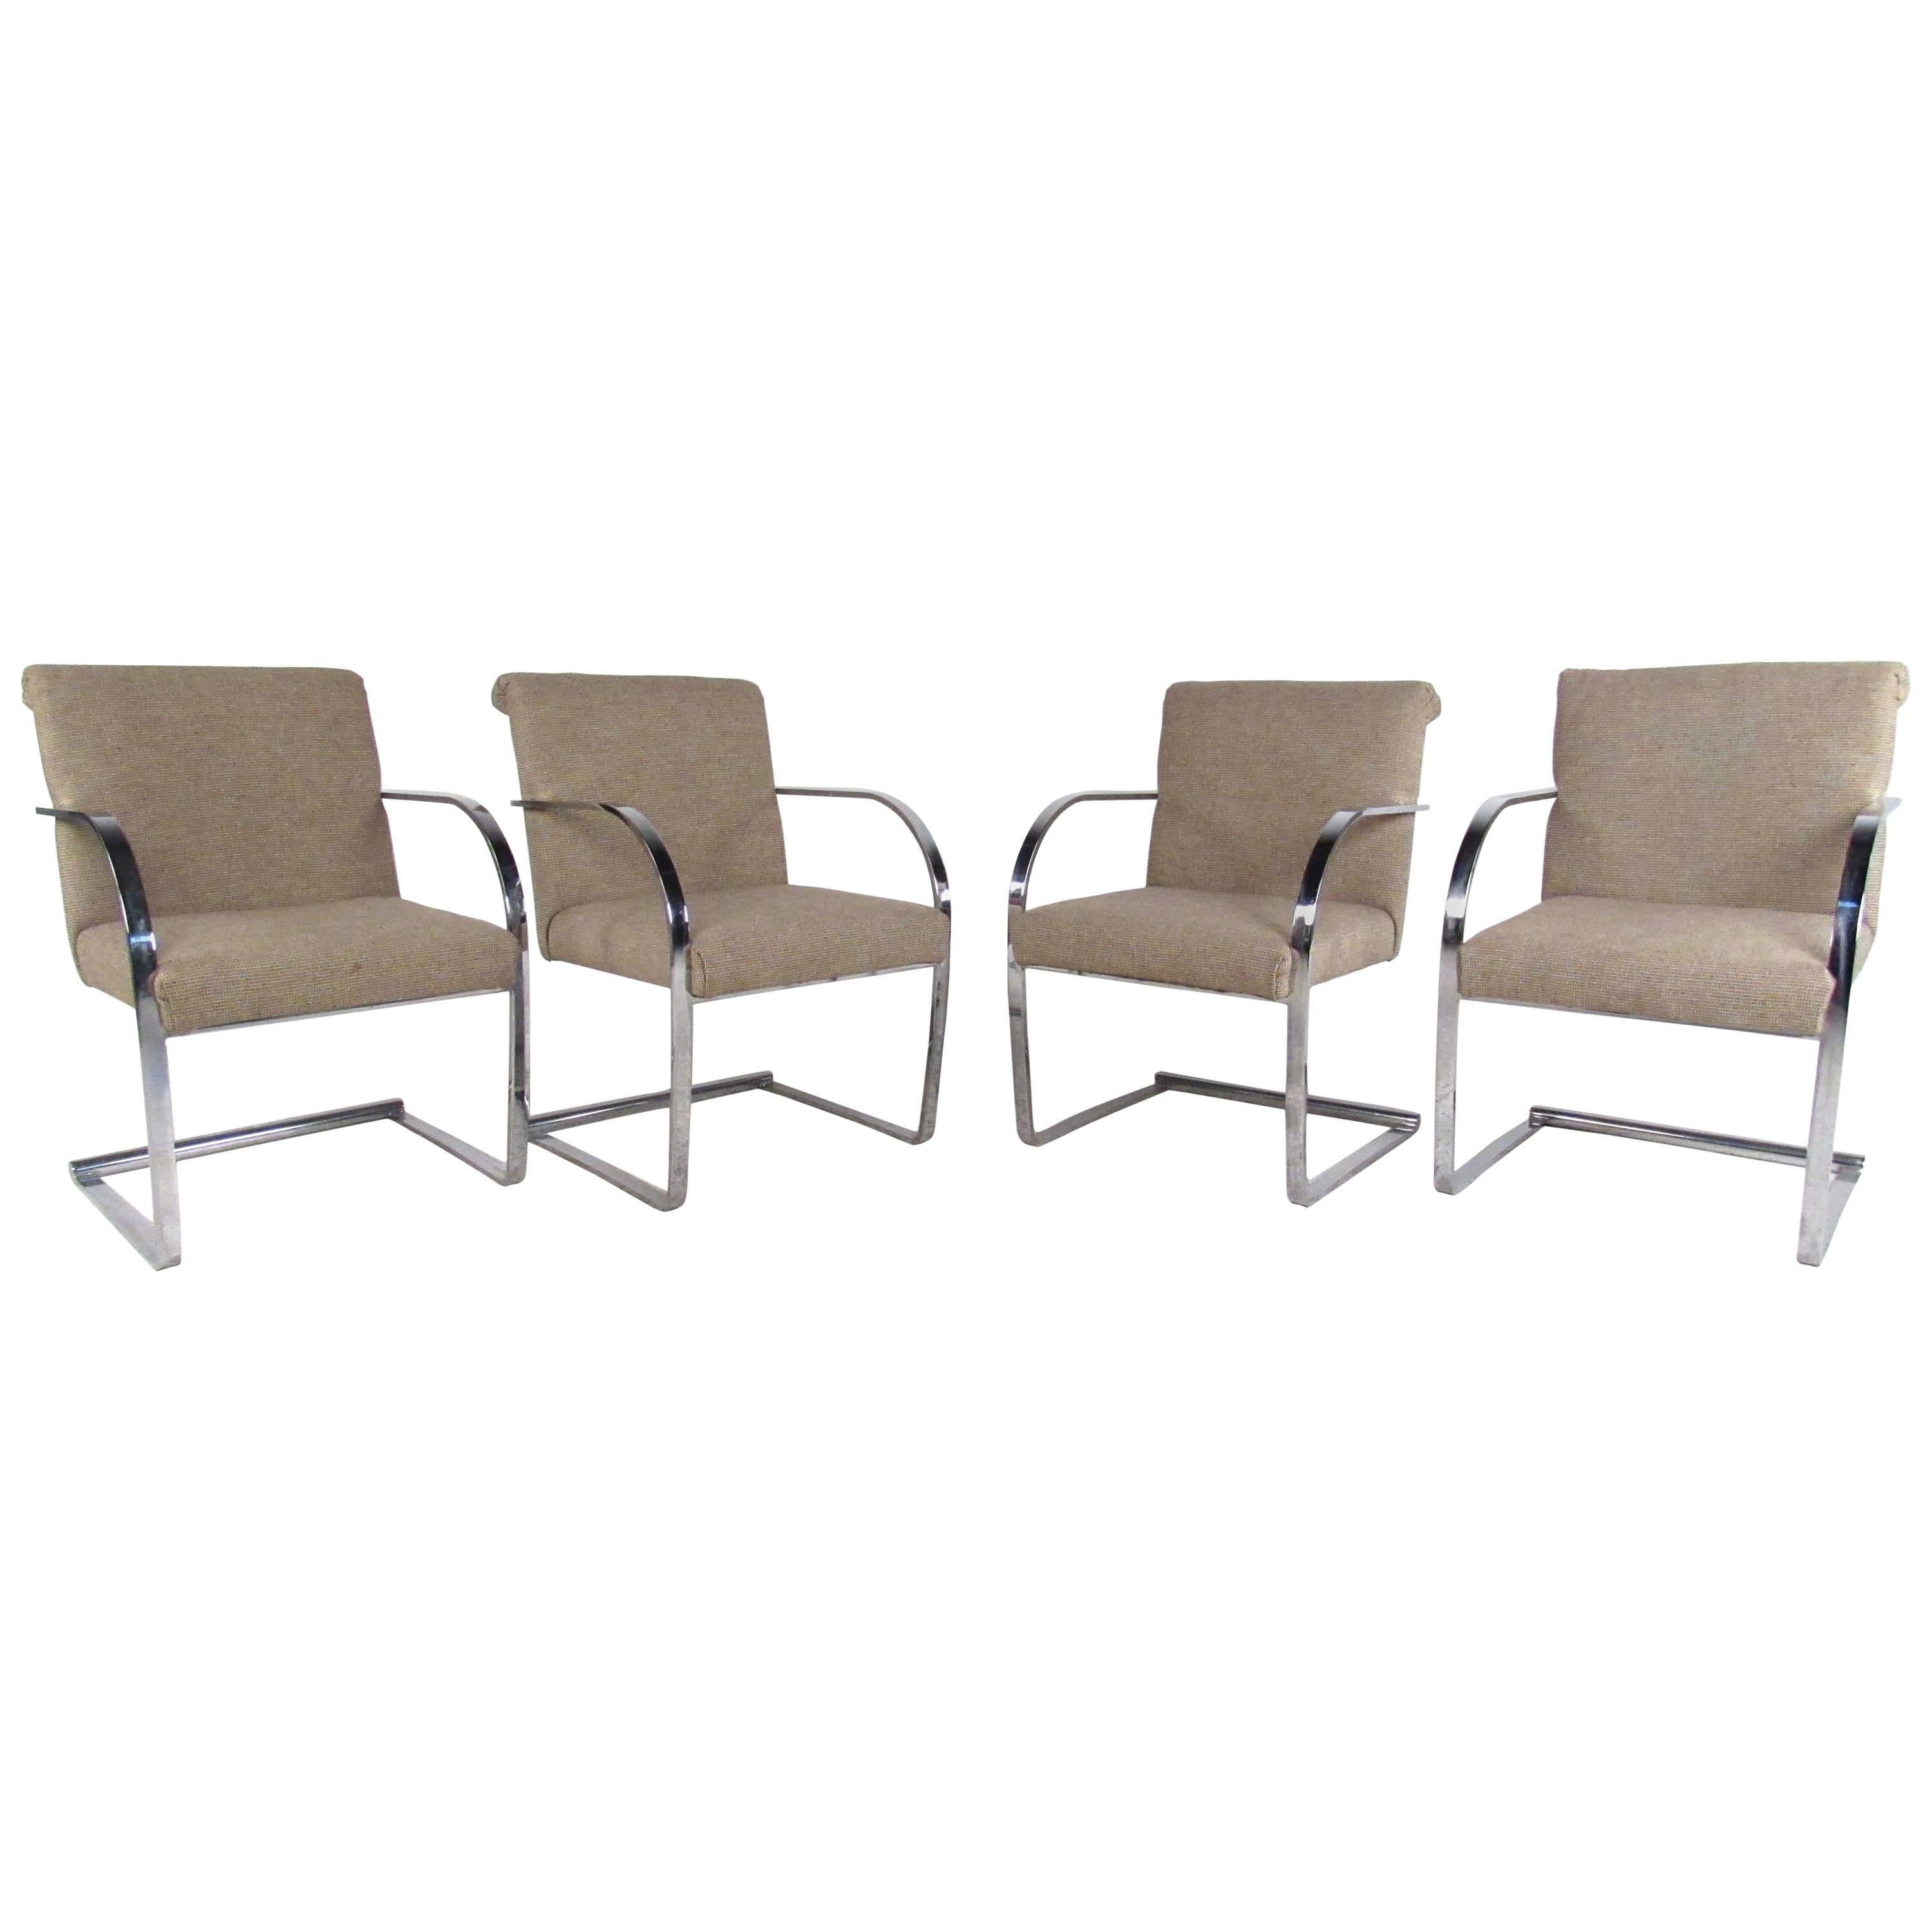 Set of Four Mid-Century Modern Knoll Style Brno Dining Chairs For Sale